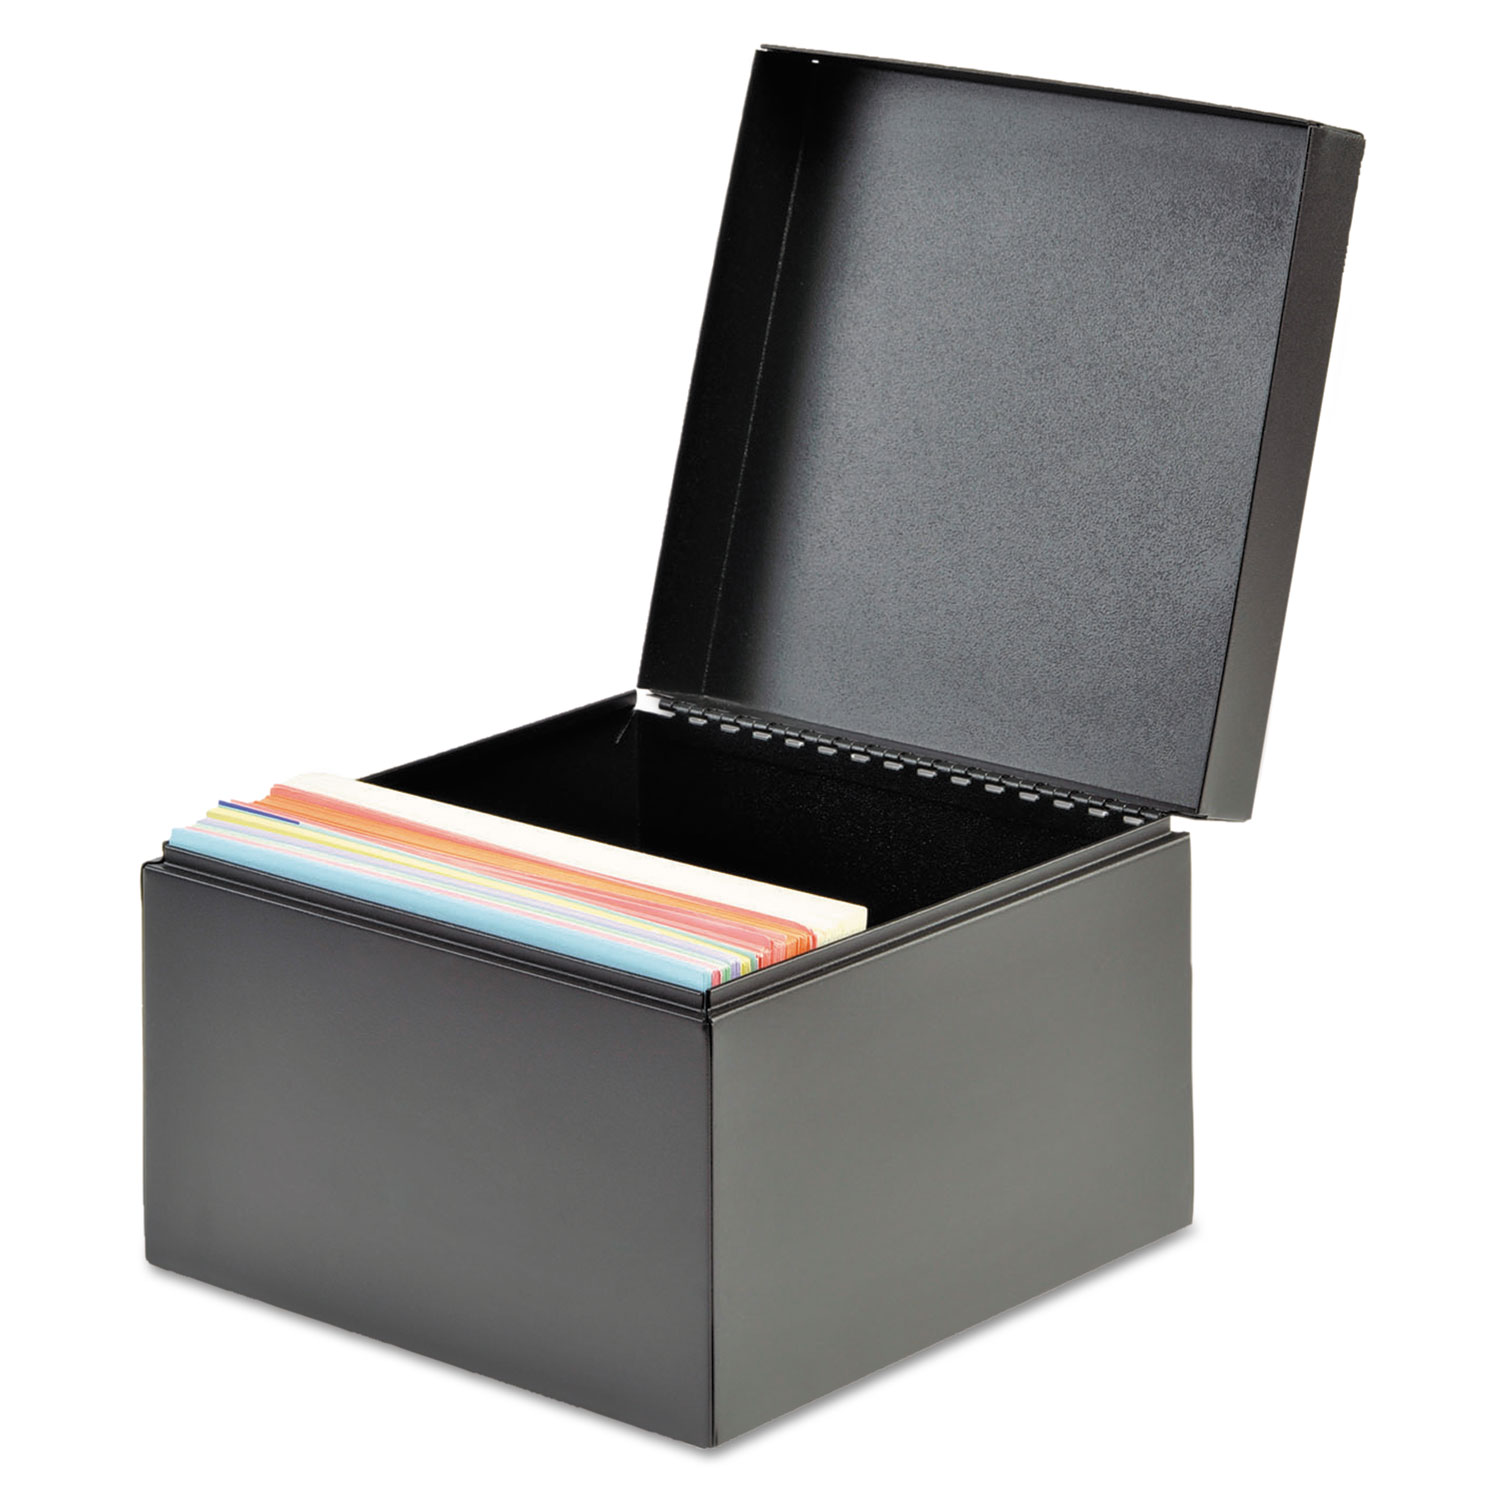 Index Card File, Holds 500 4 x 6 Cards, 6.56 x 4.13 x 4.78, Steel, Black -  Cartridge Savers